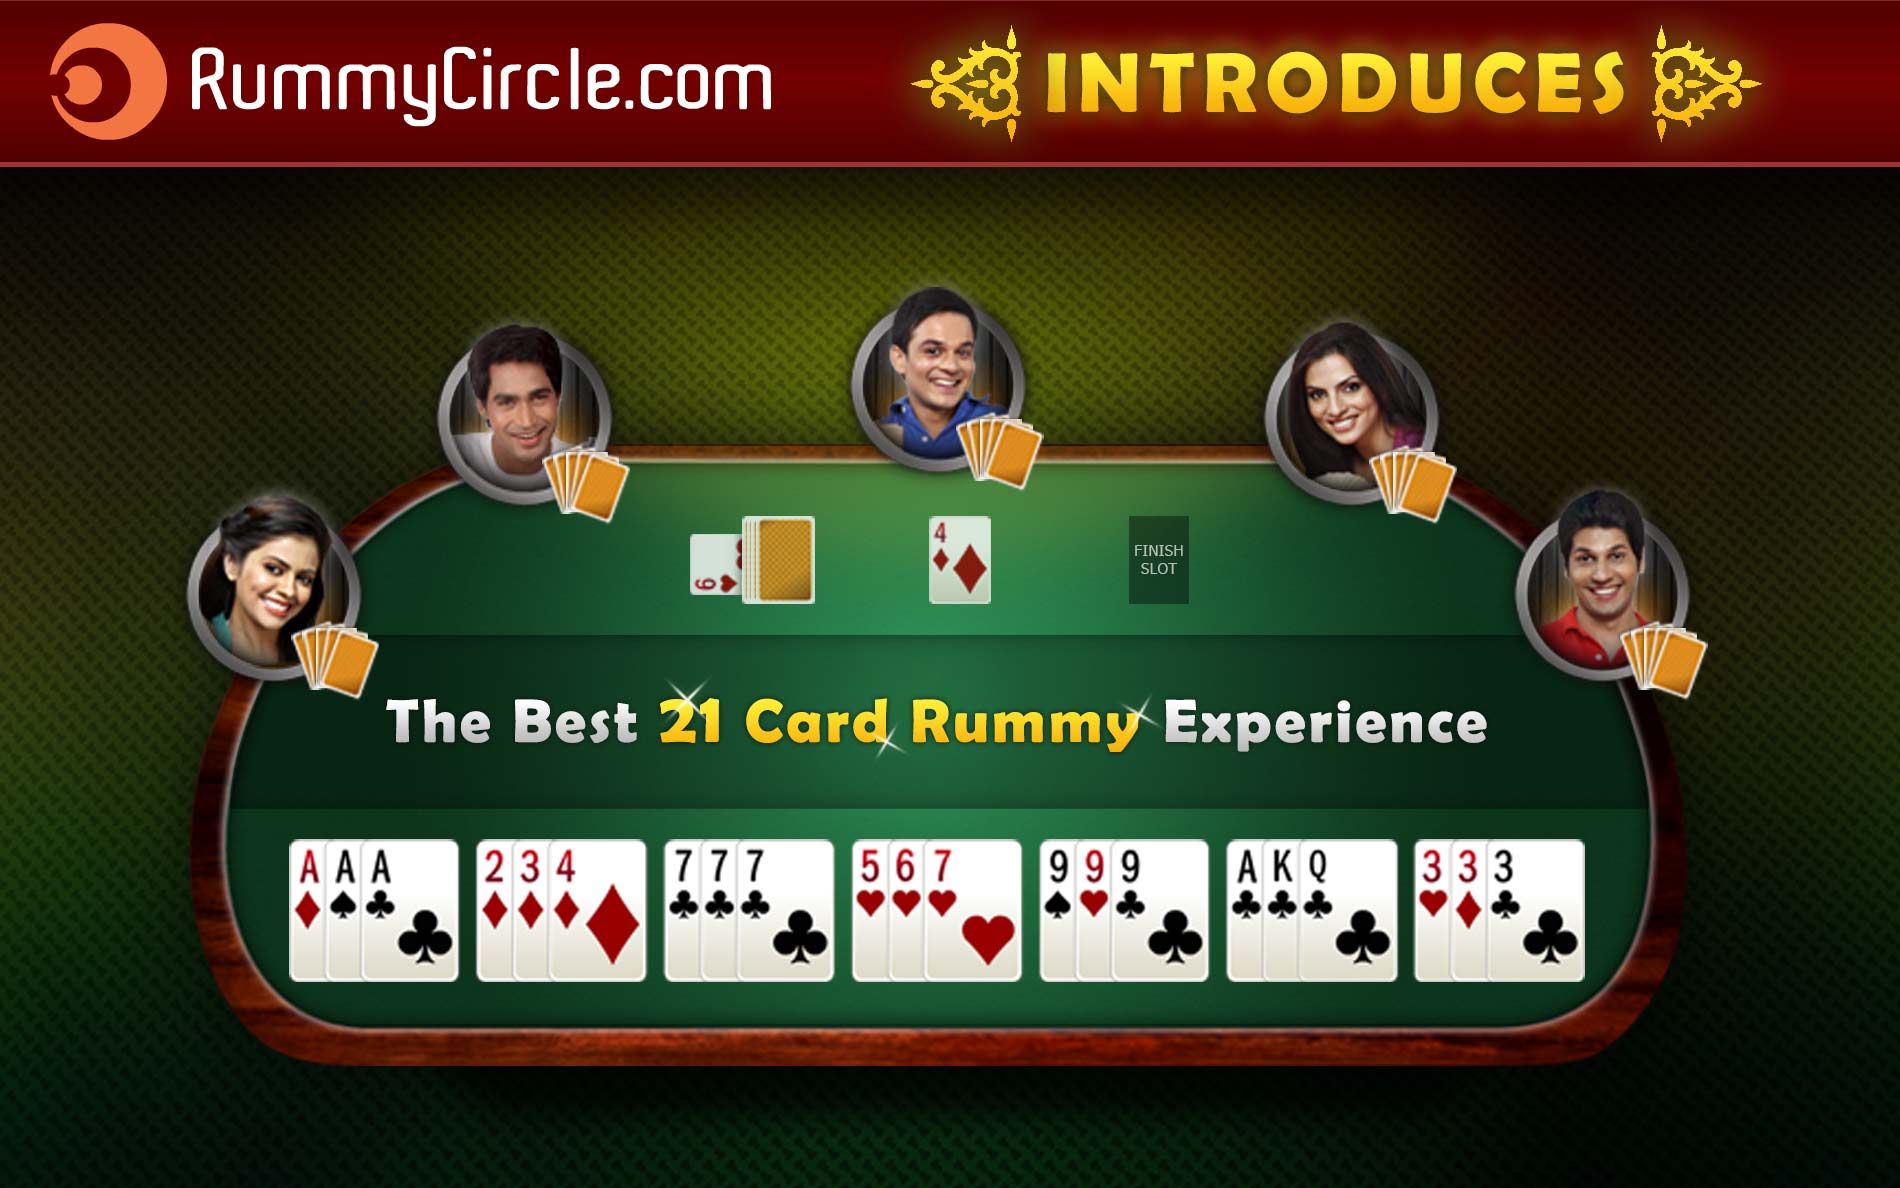 What Is Rummy Circle?